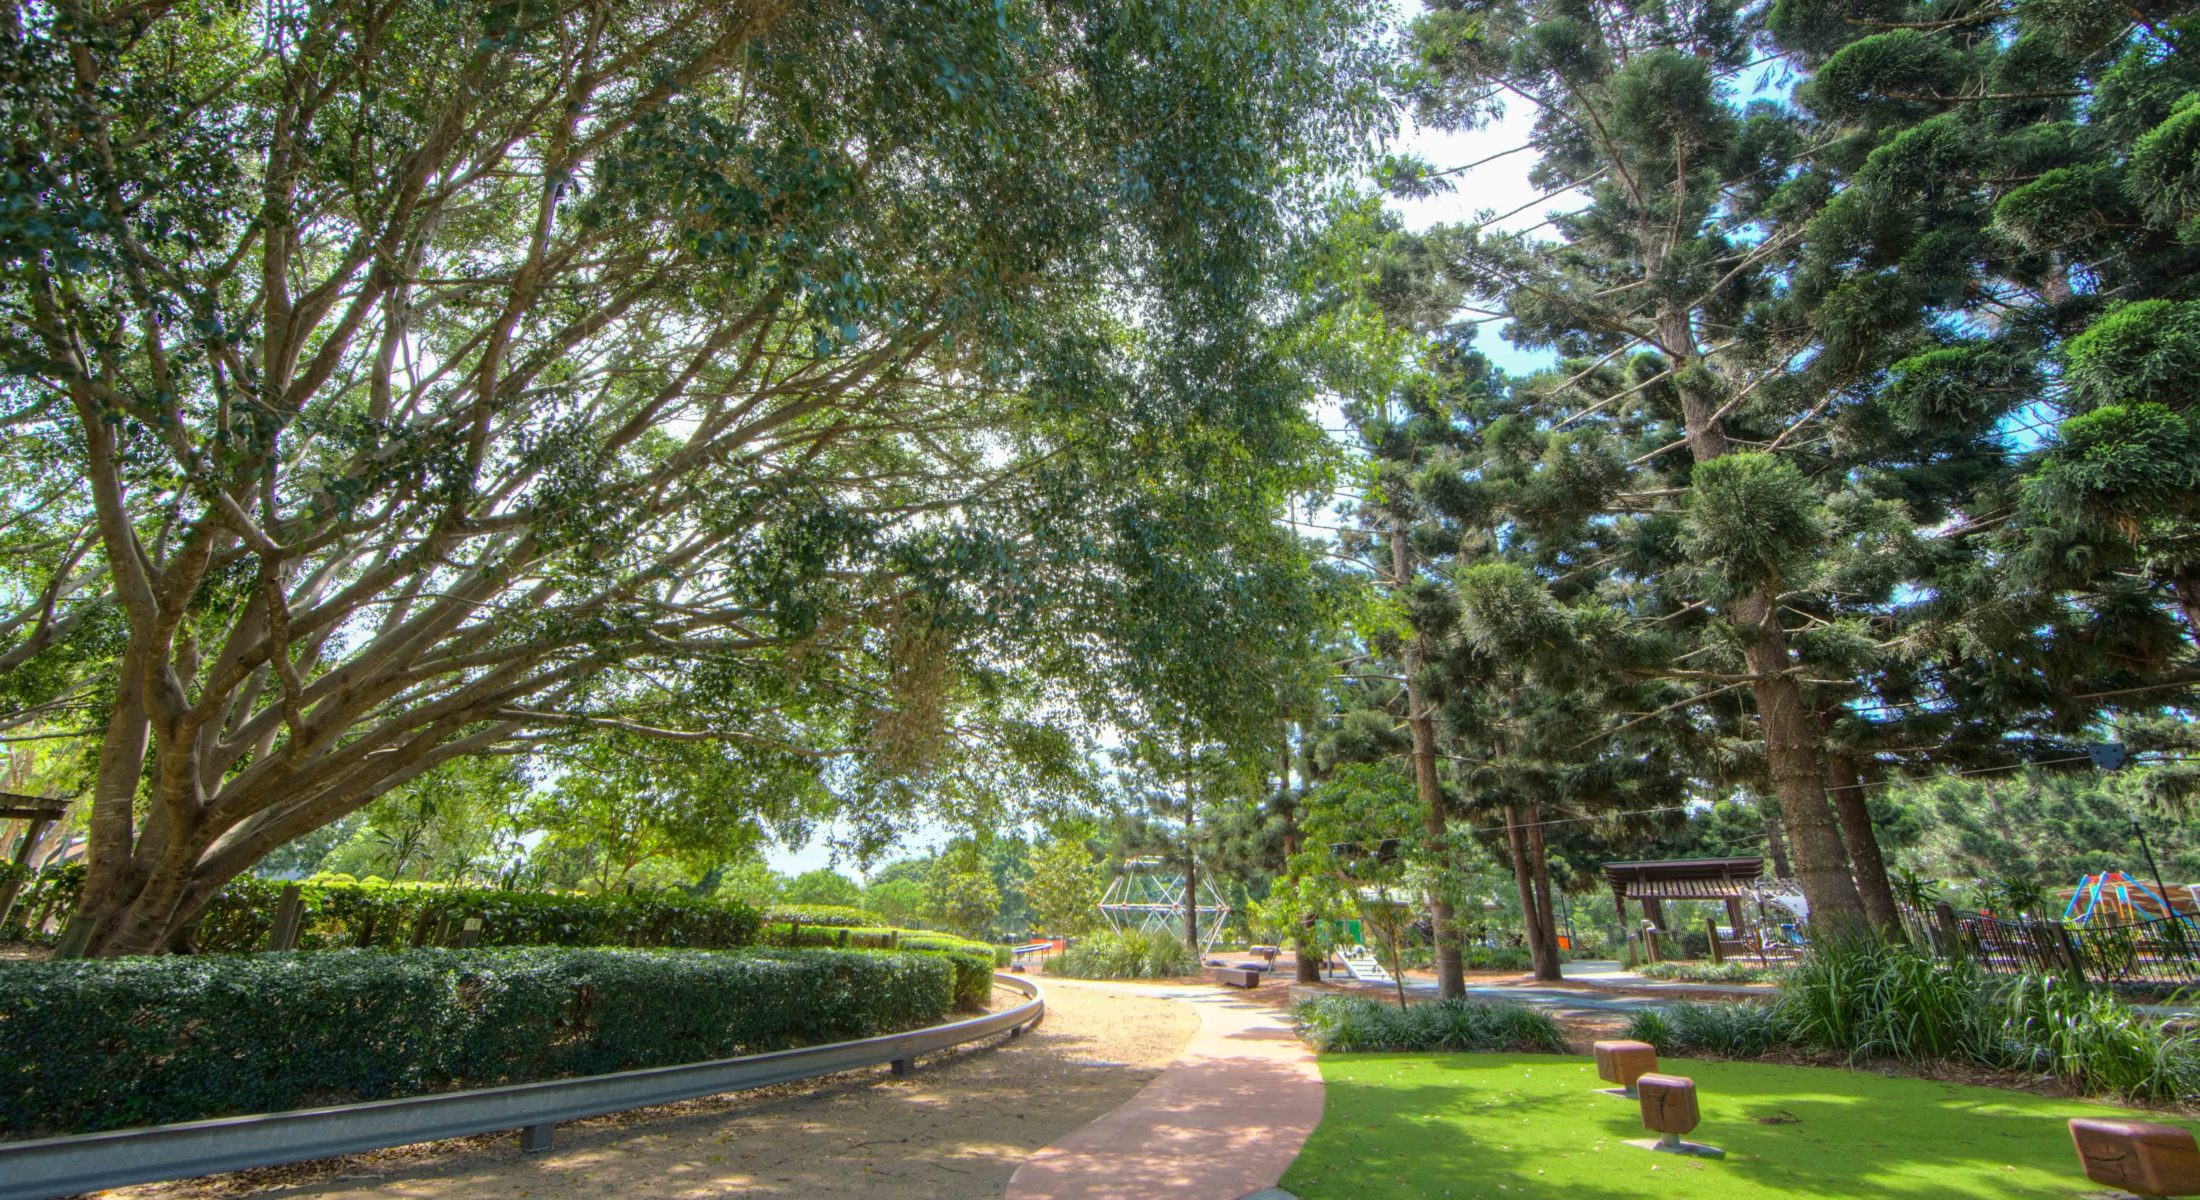 Pine Rivers Park at Strathpine has accessible pathways throughout the parklands